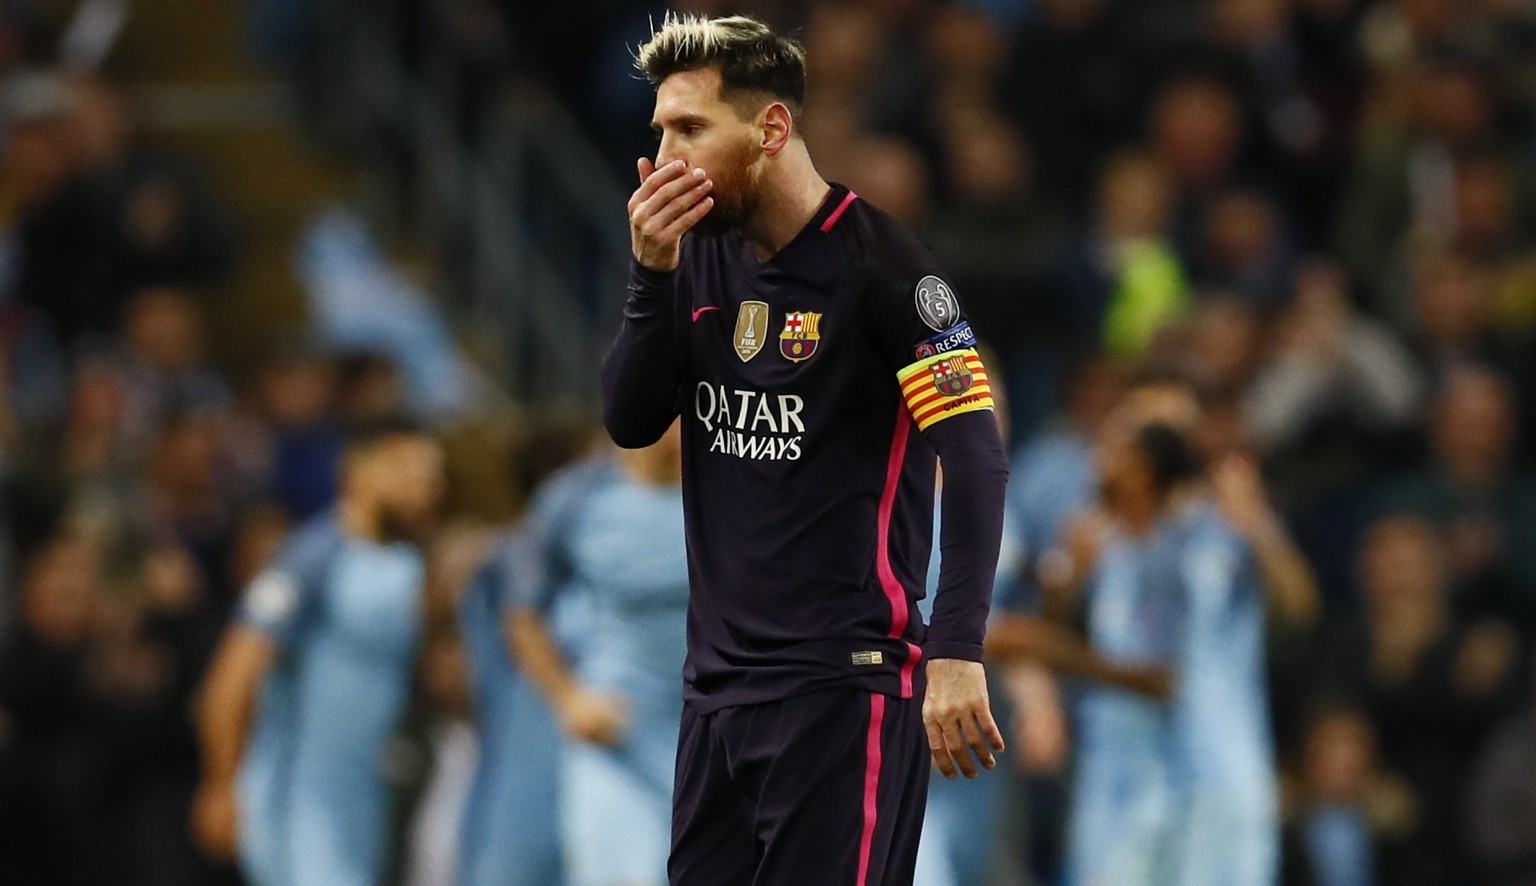 Britain Football Soccer - Manchester City v FC Barcelona - UEFA Champions League Group Stage - Group C - Etihad Stadium, Manchester, England - 1/11/16
Barcelona&#039;s Lionel Messi looks dejected aft ...